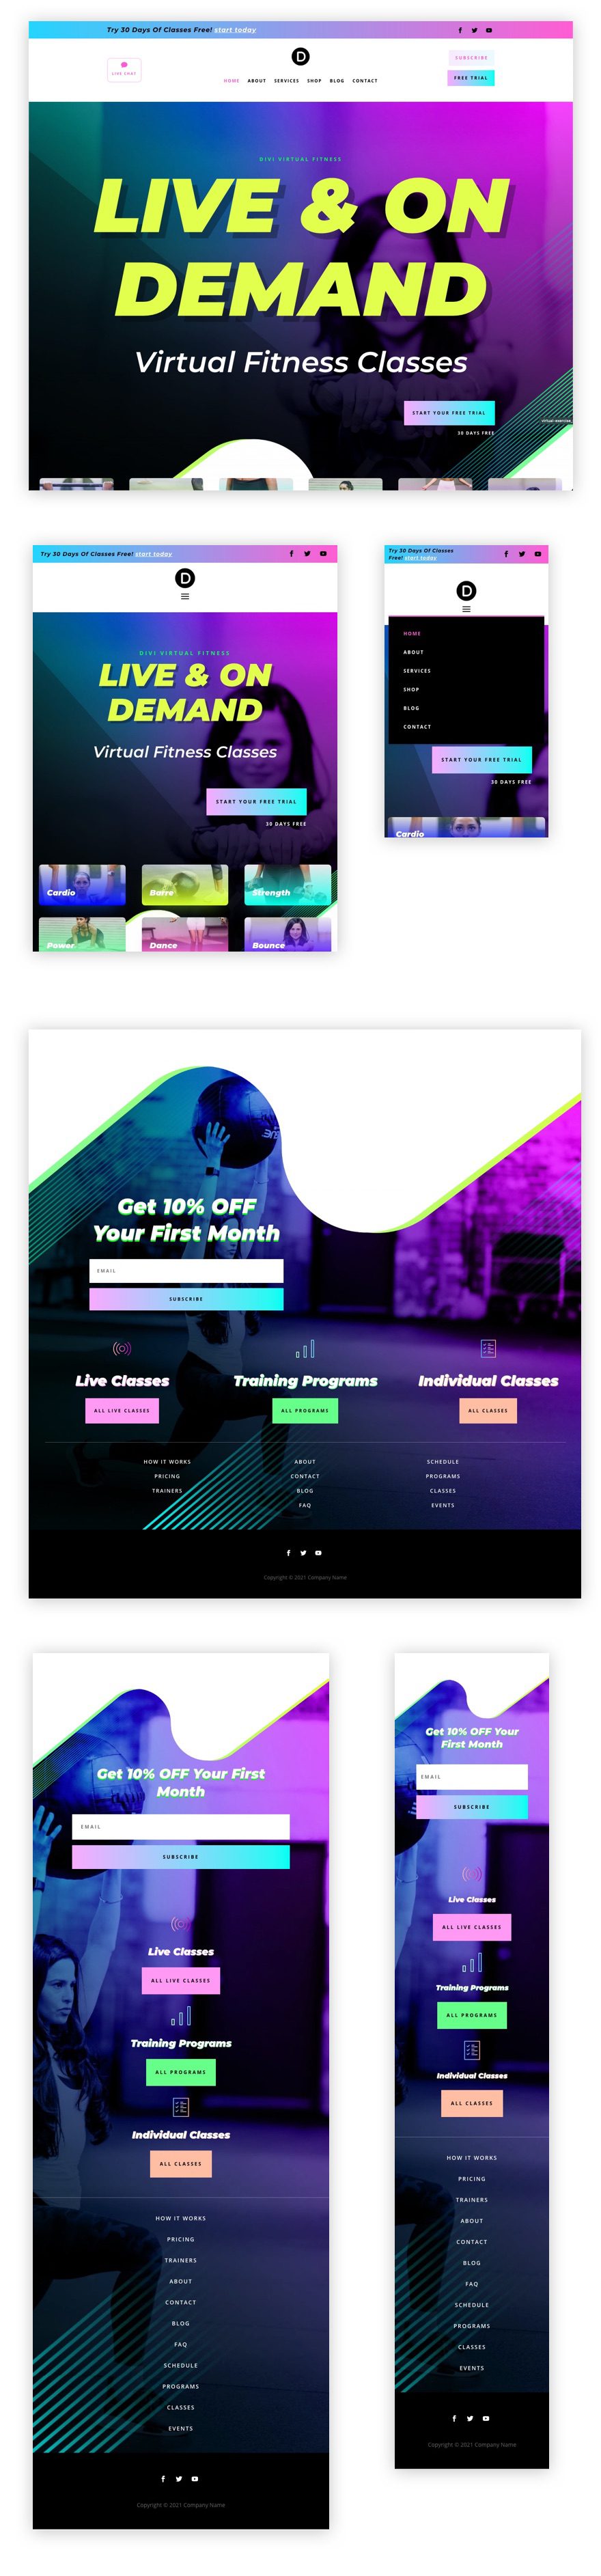 virtual fitness header and footer template